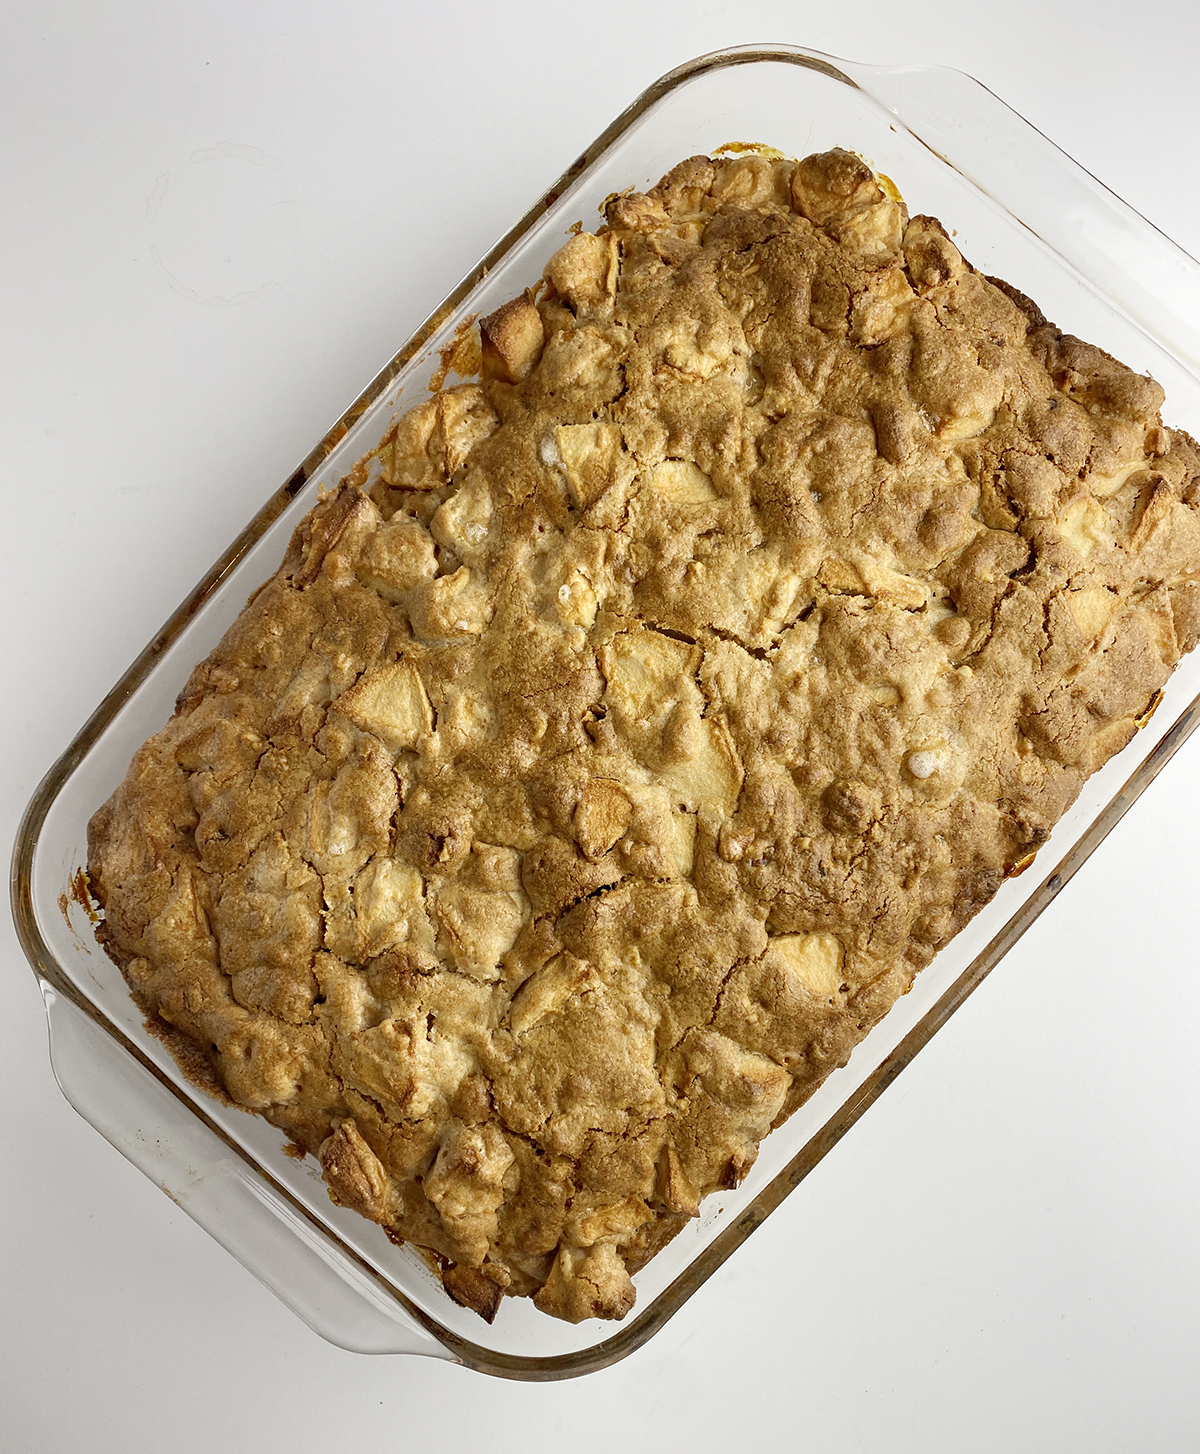 Baked apple cake in a casserole dish.